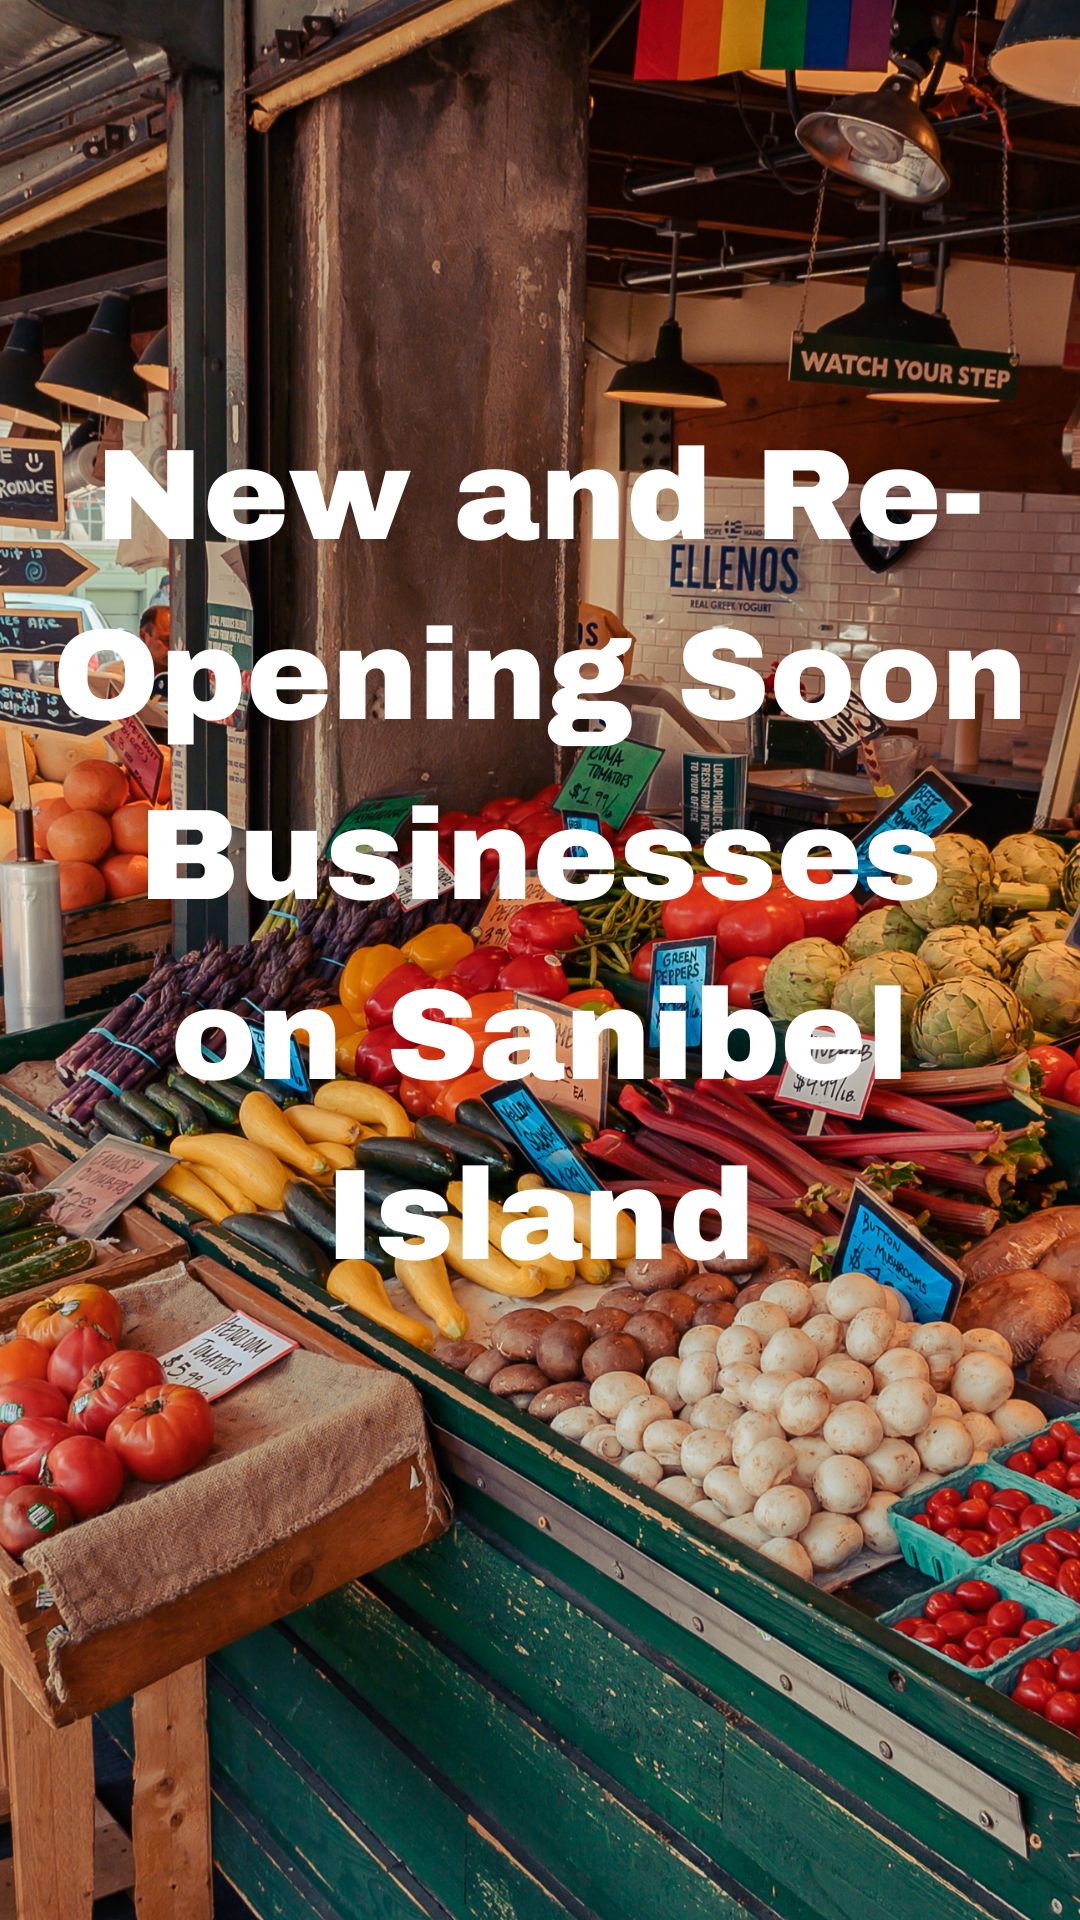 New and Re-Opening Soon Businesses on Sanibel Island